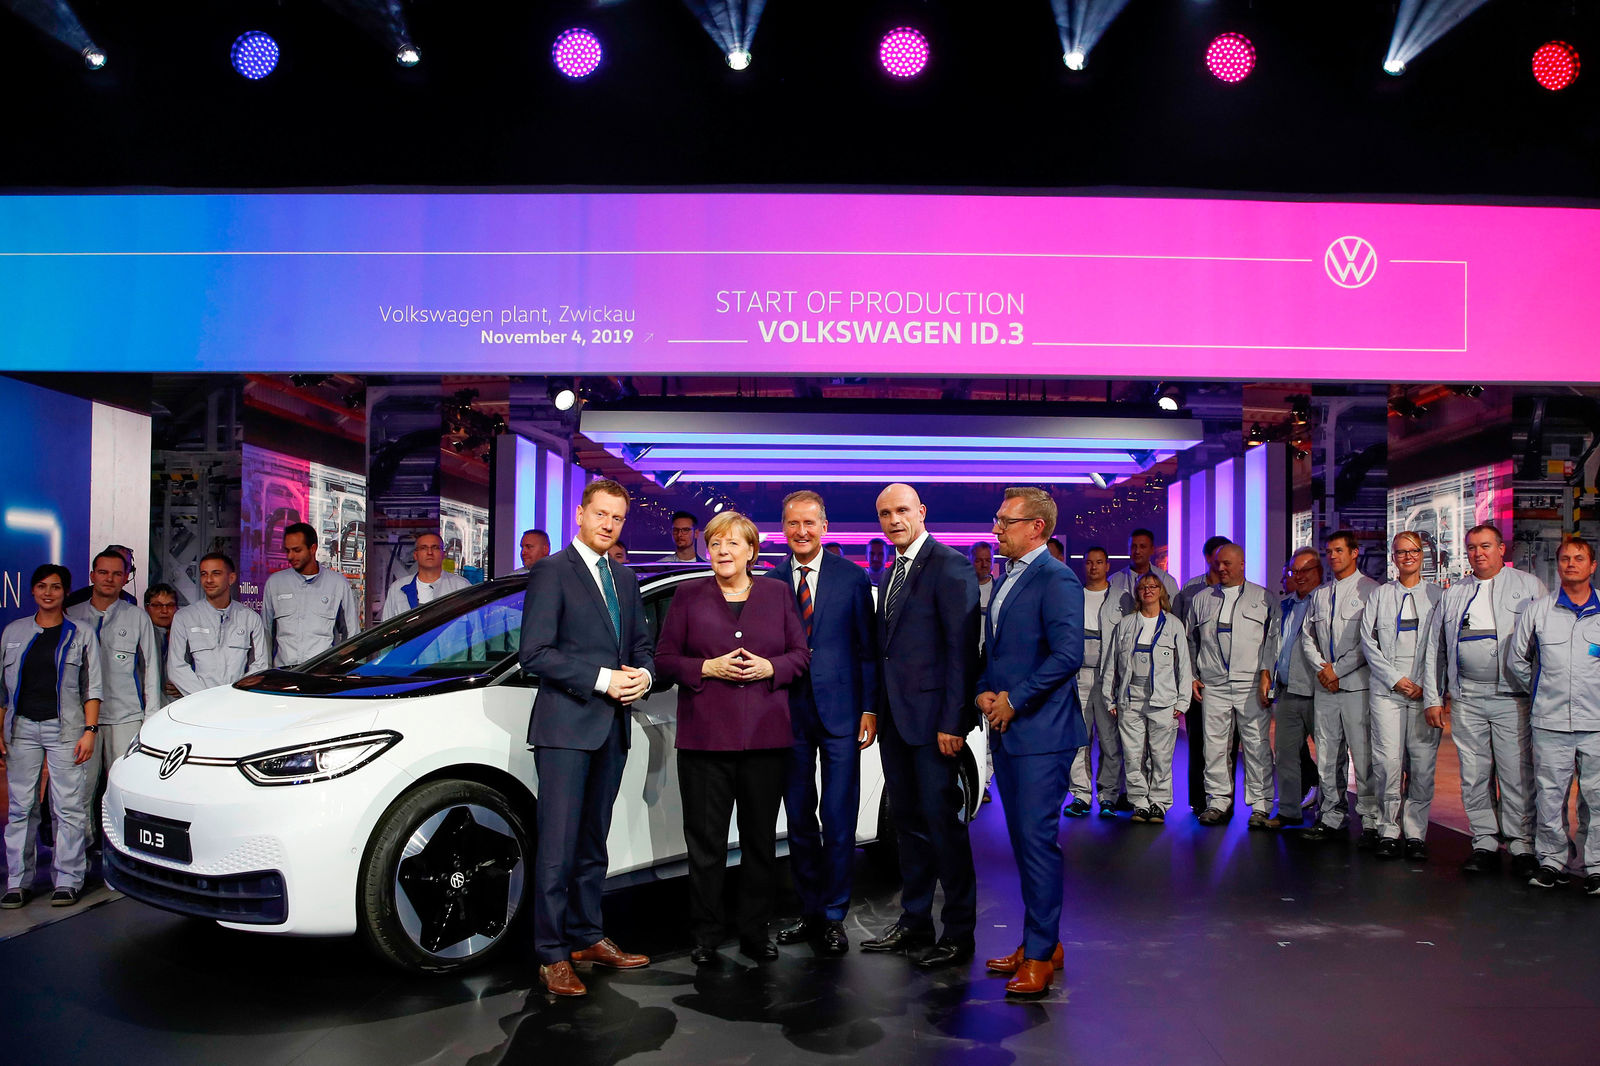 Volkswagen initiates system changeover to e-mobility – Production of the ID.3 starts in Zwickau